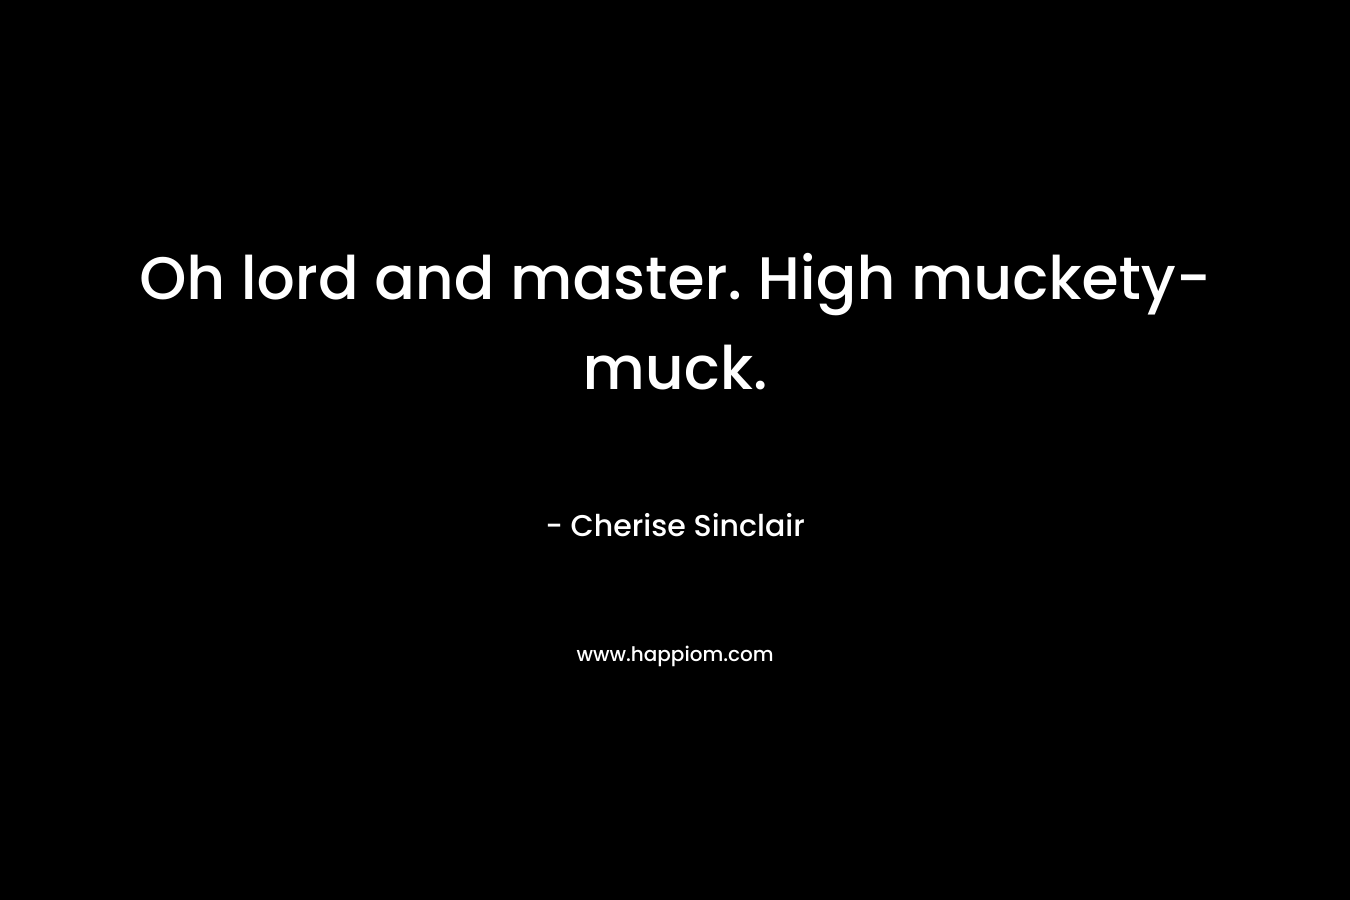 Oh lord and master. High muckety-muck. – Cherise Sinclair